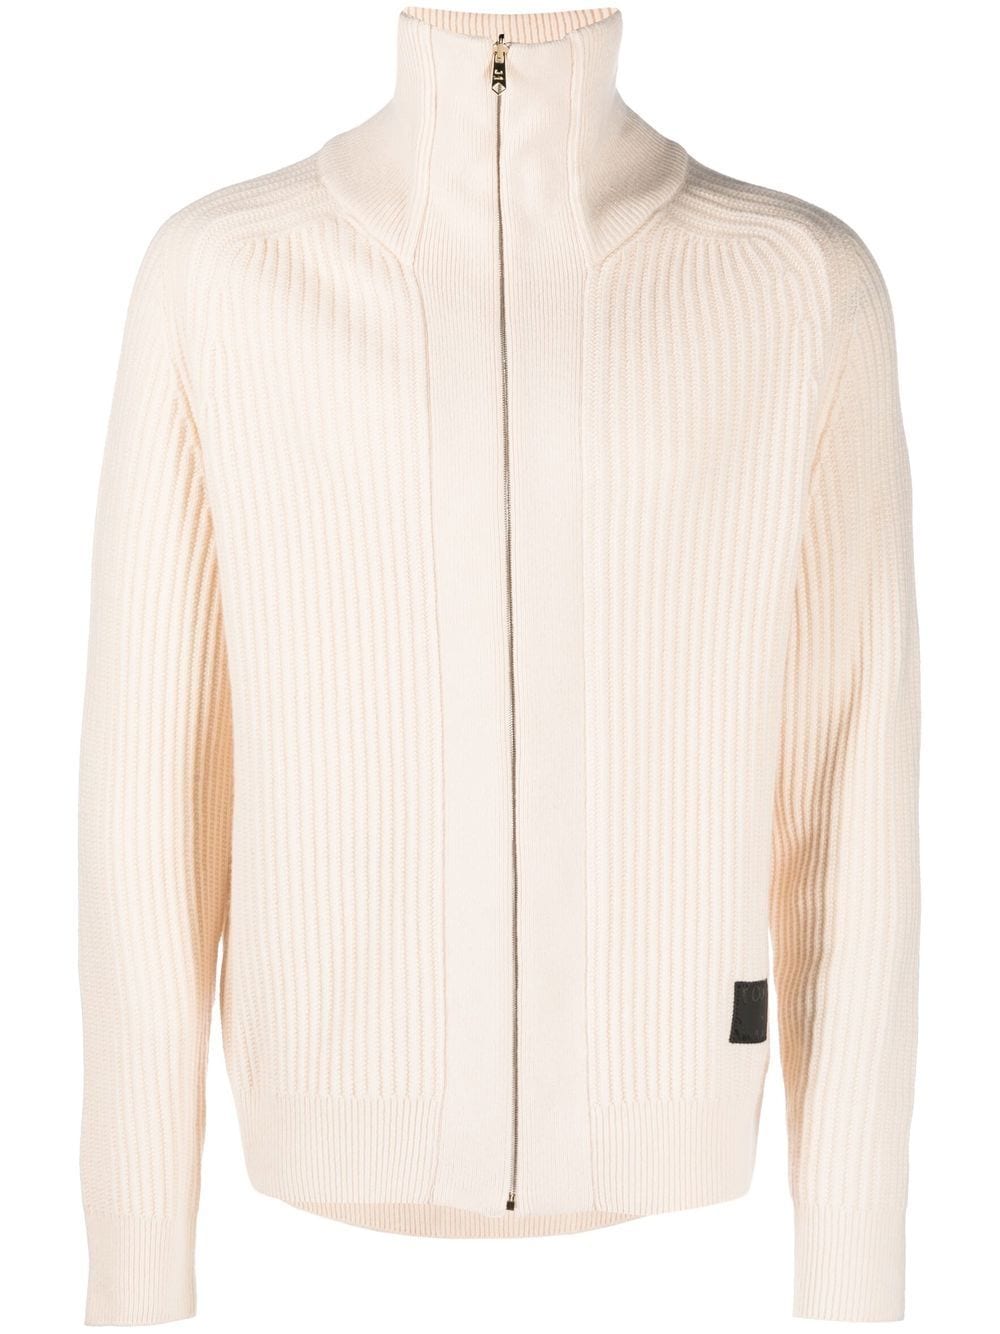 Paul Smith ribbed knit wool cardigan - Neutrals